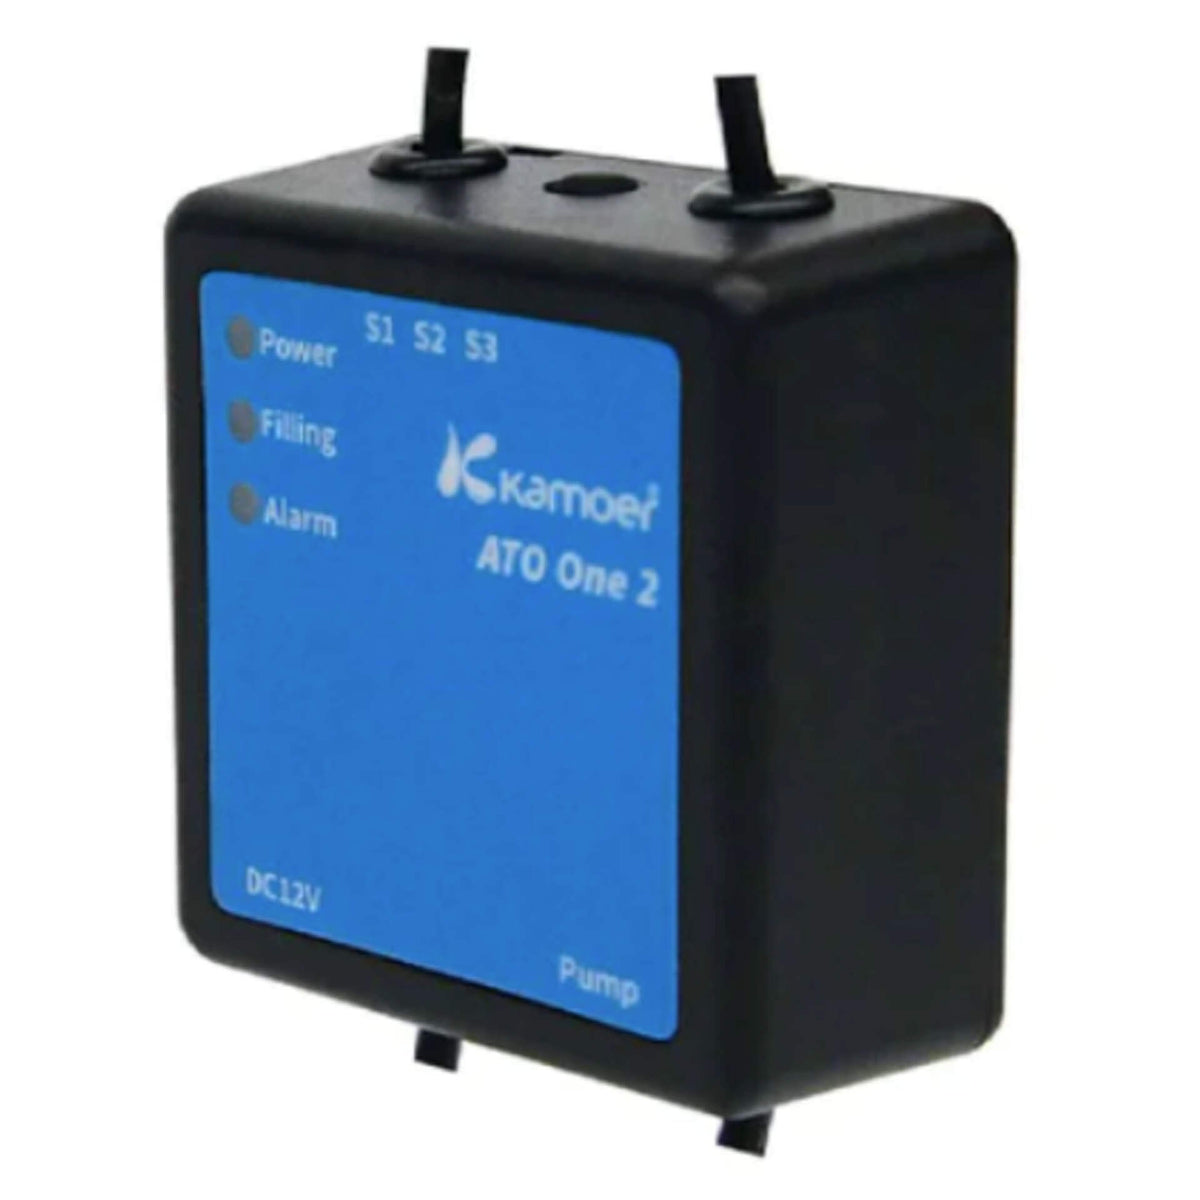 Kamoer ATO One 2 SE - Auto Top up Device